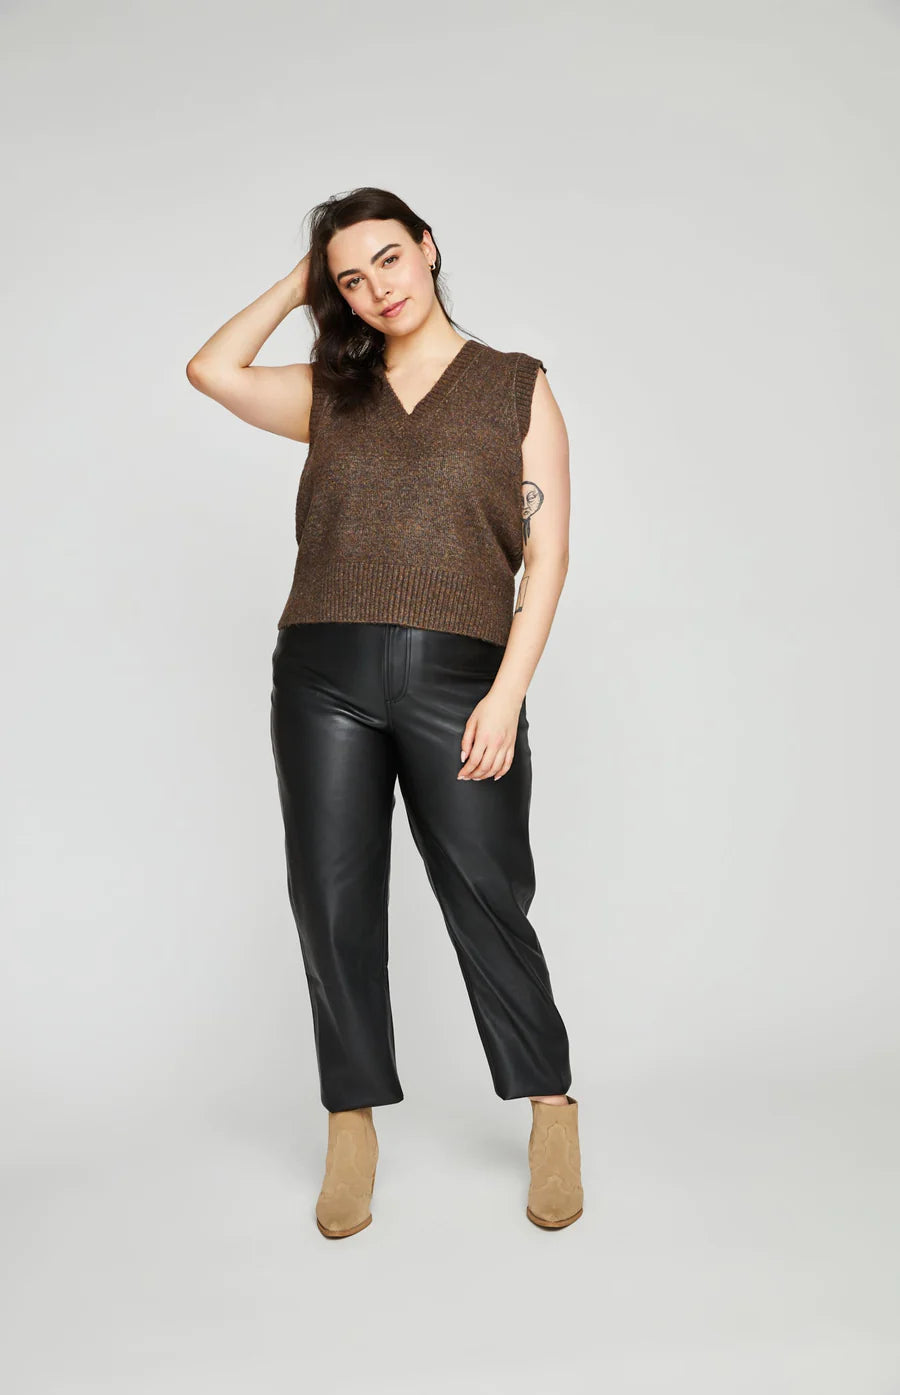 Plus size woman wearing dark brown sweater vest with leather pants.